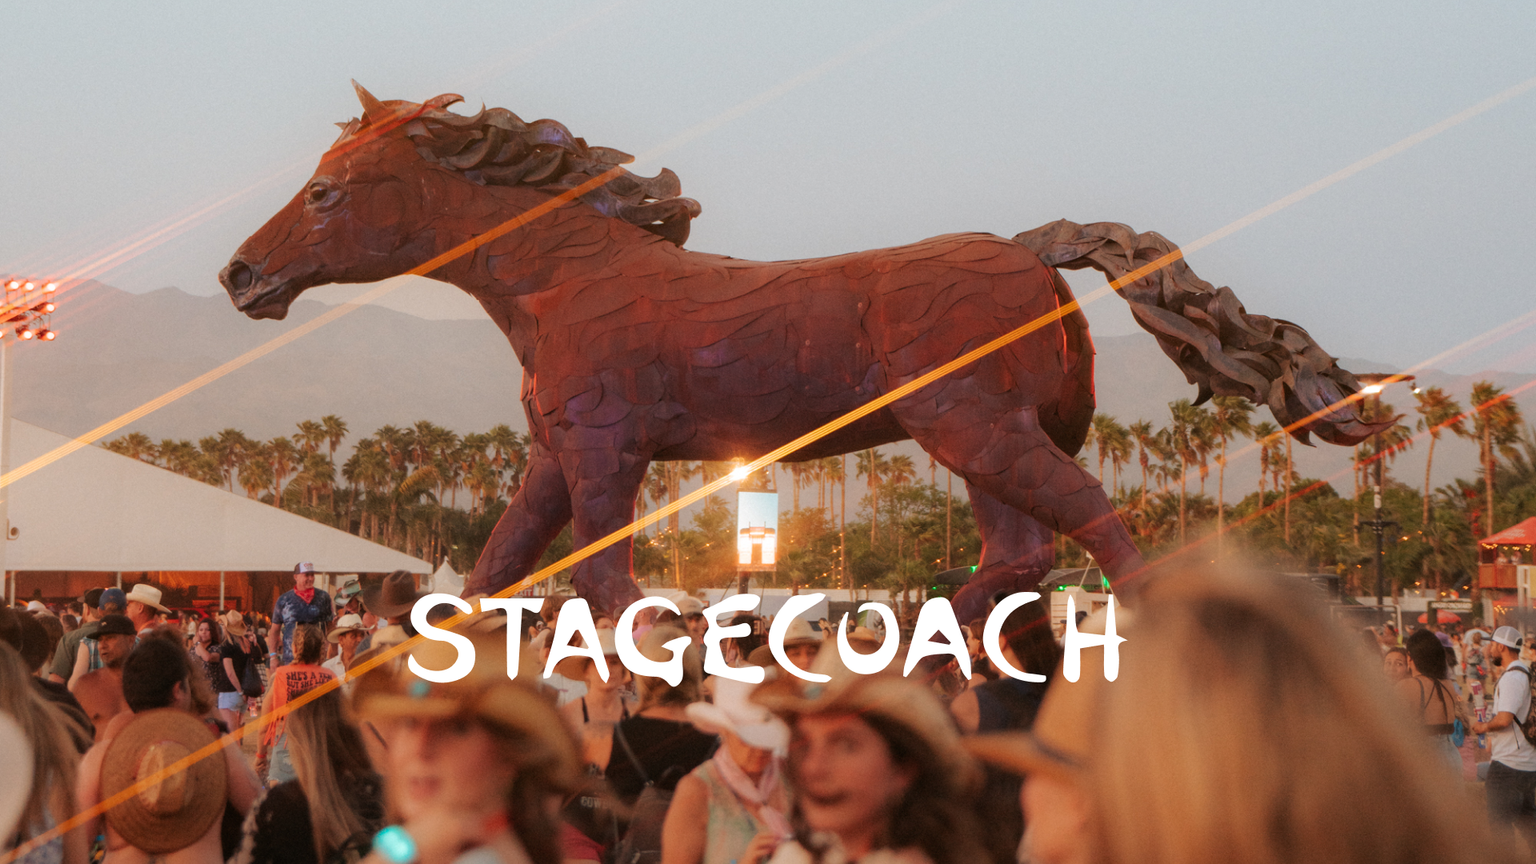 Large metal horse sculpture at a crowded outdoor music festival with the word "stagecoach" overlaid at sunset.